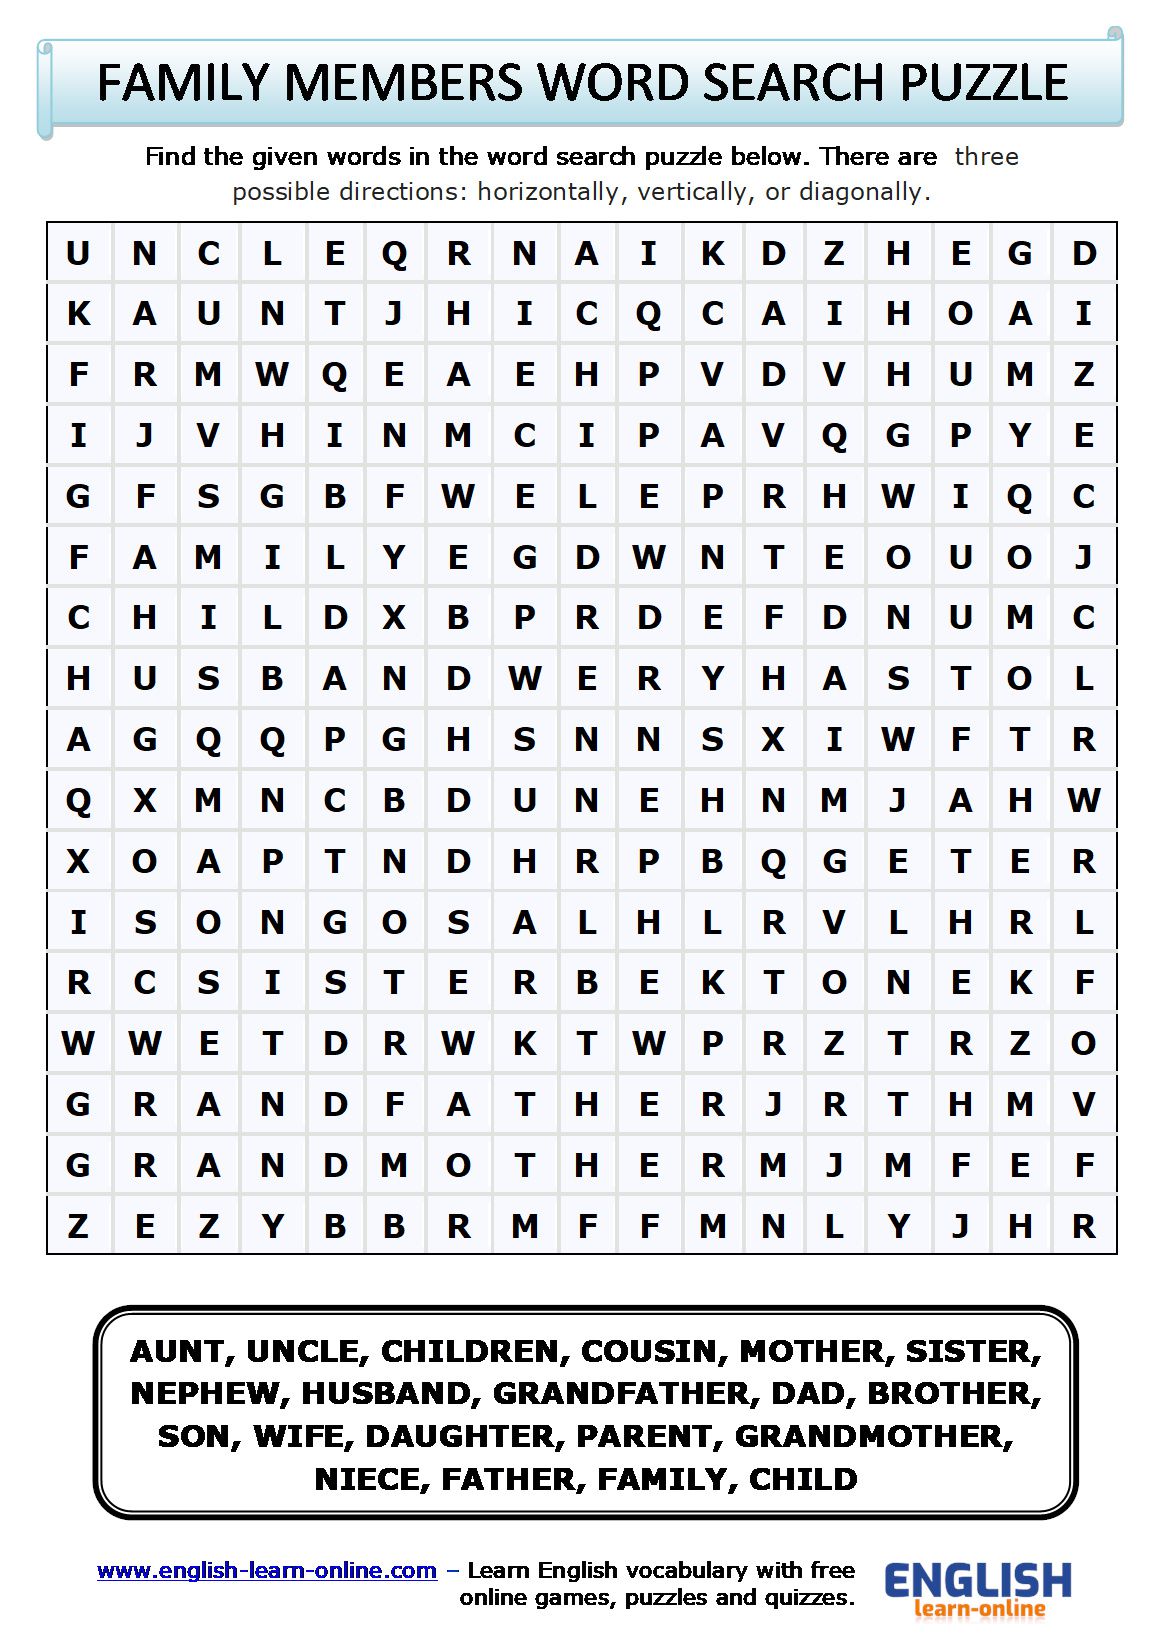 Family words vocabulary. Weather Word search. My Family Wordsearch. Word search Family members. Family members Wordsearch.